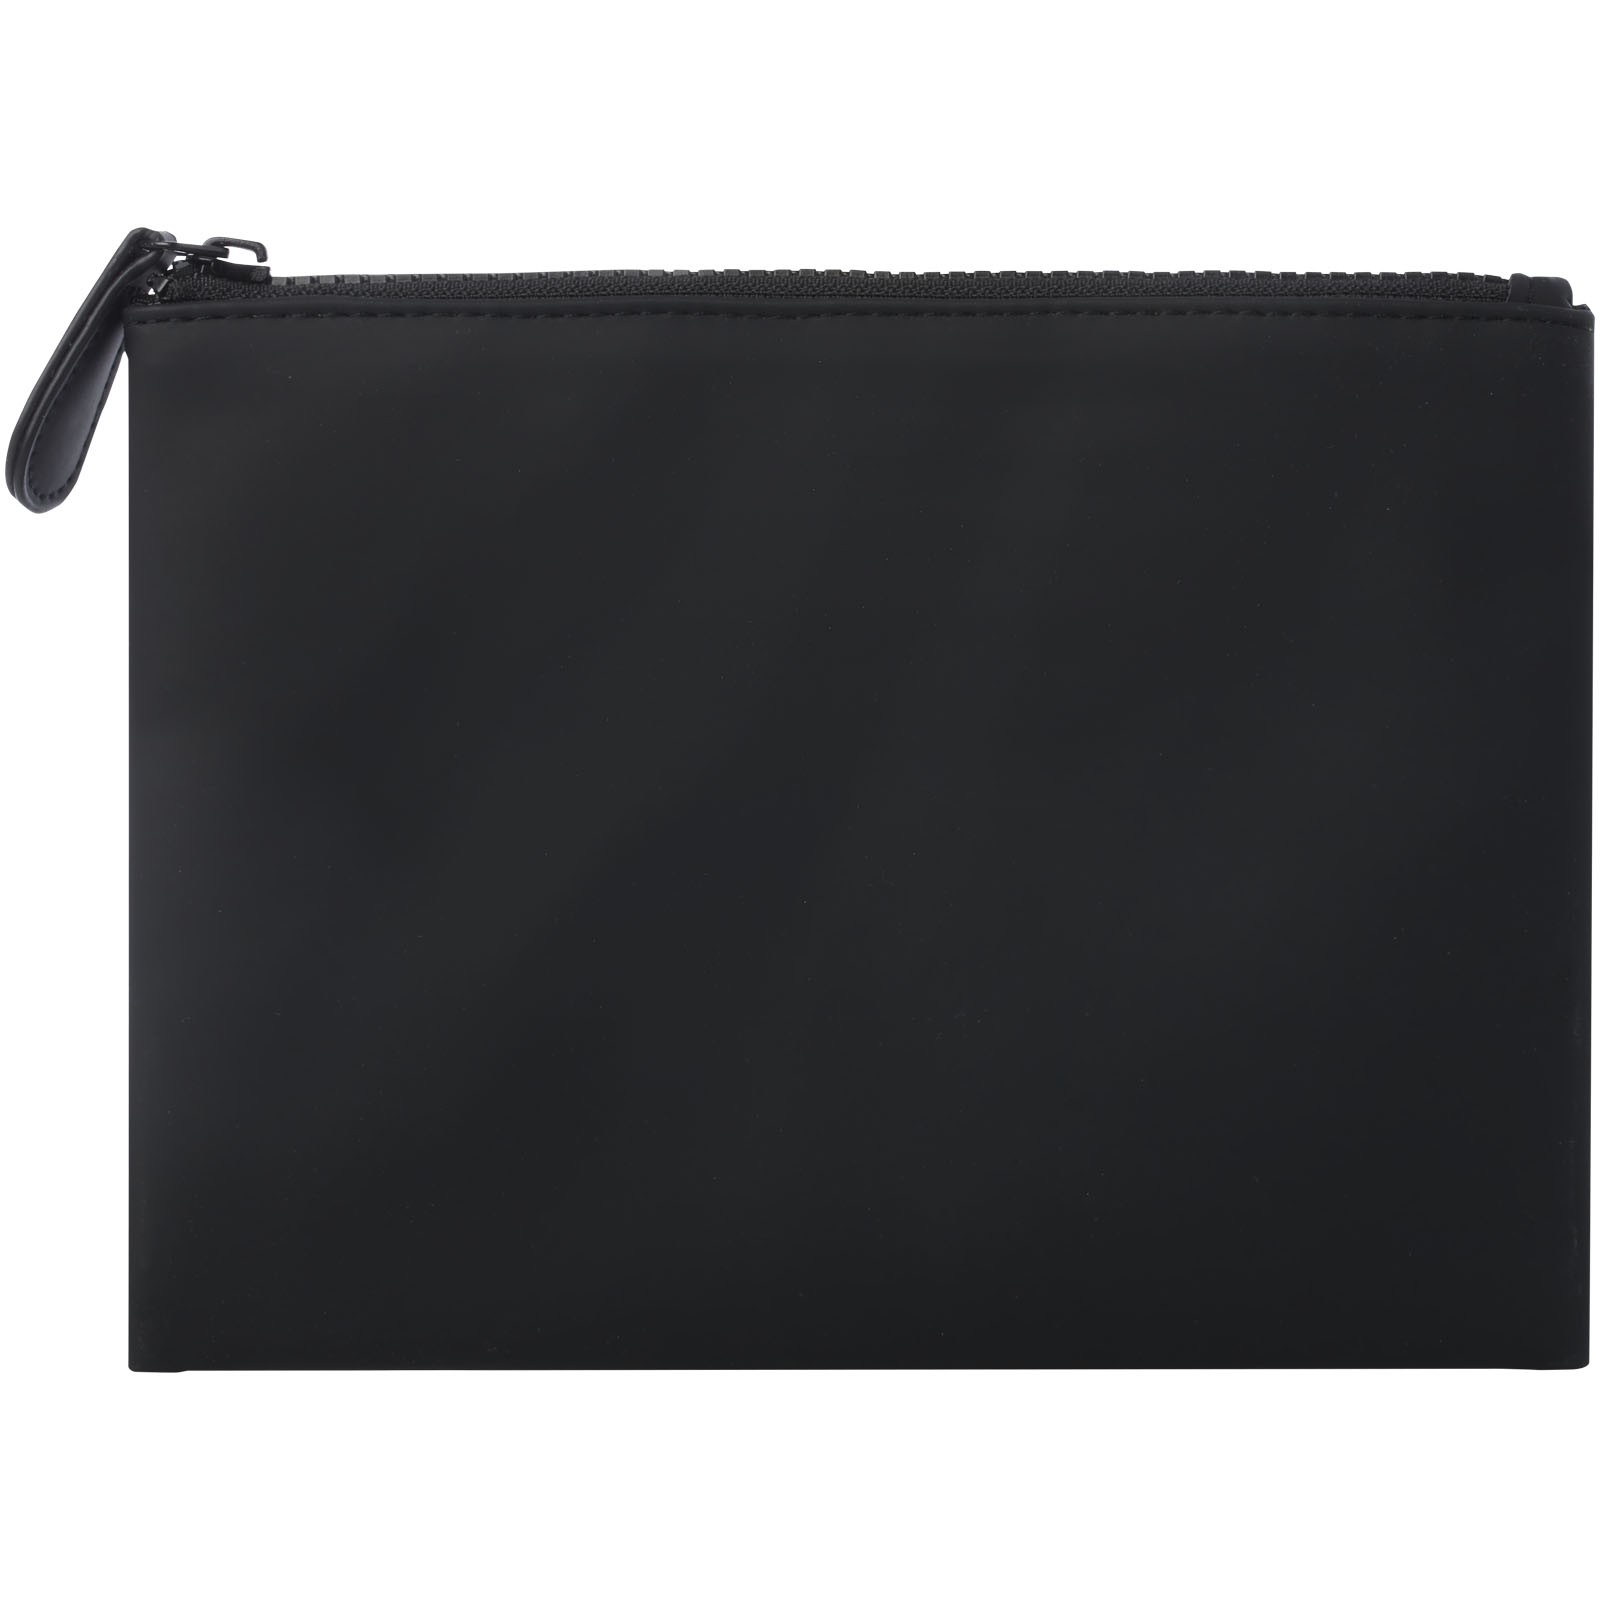 Advertising Travel Accessories - Turner pouch  - 2